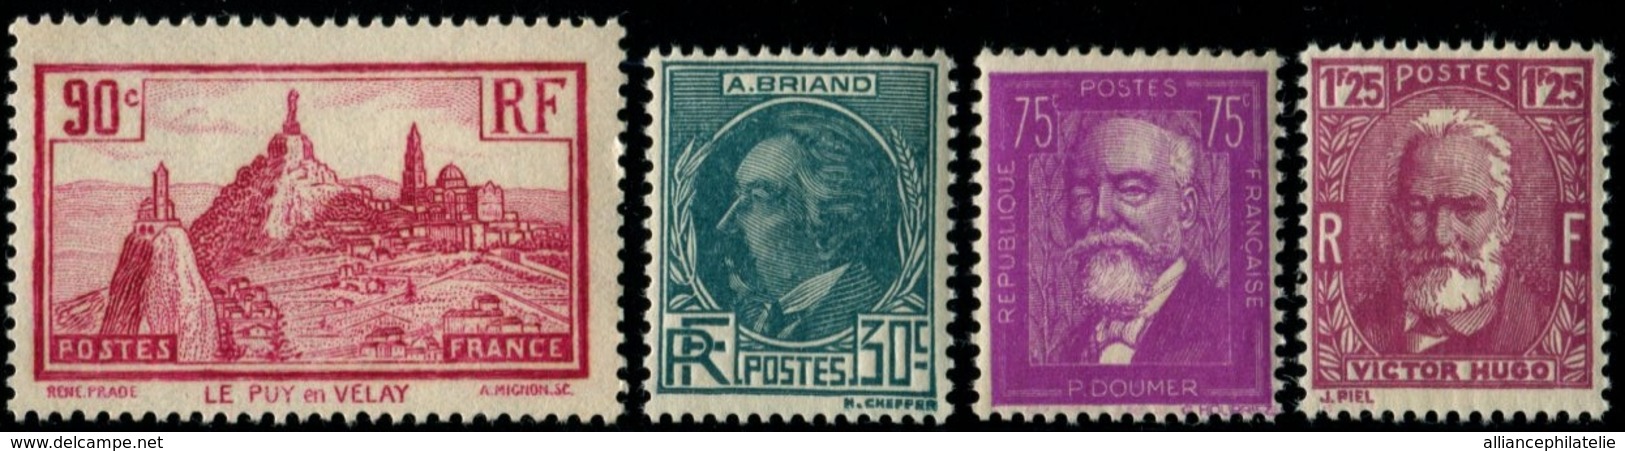 Lot N°7217 France Année Complète 1933 Neuf ** LUXE - ....-1939